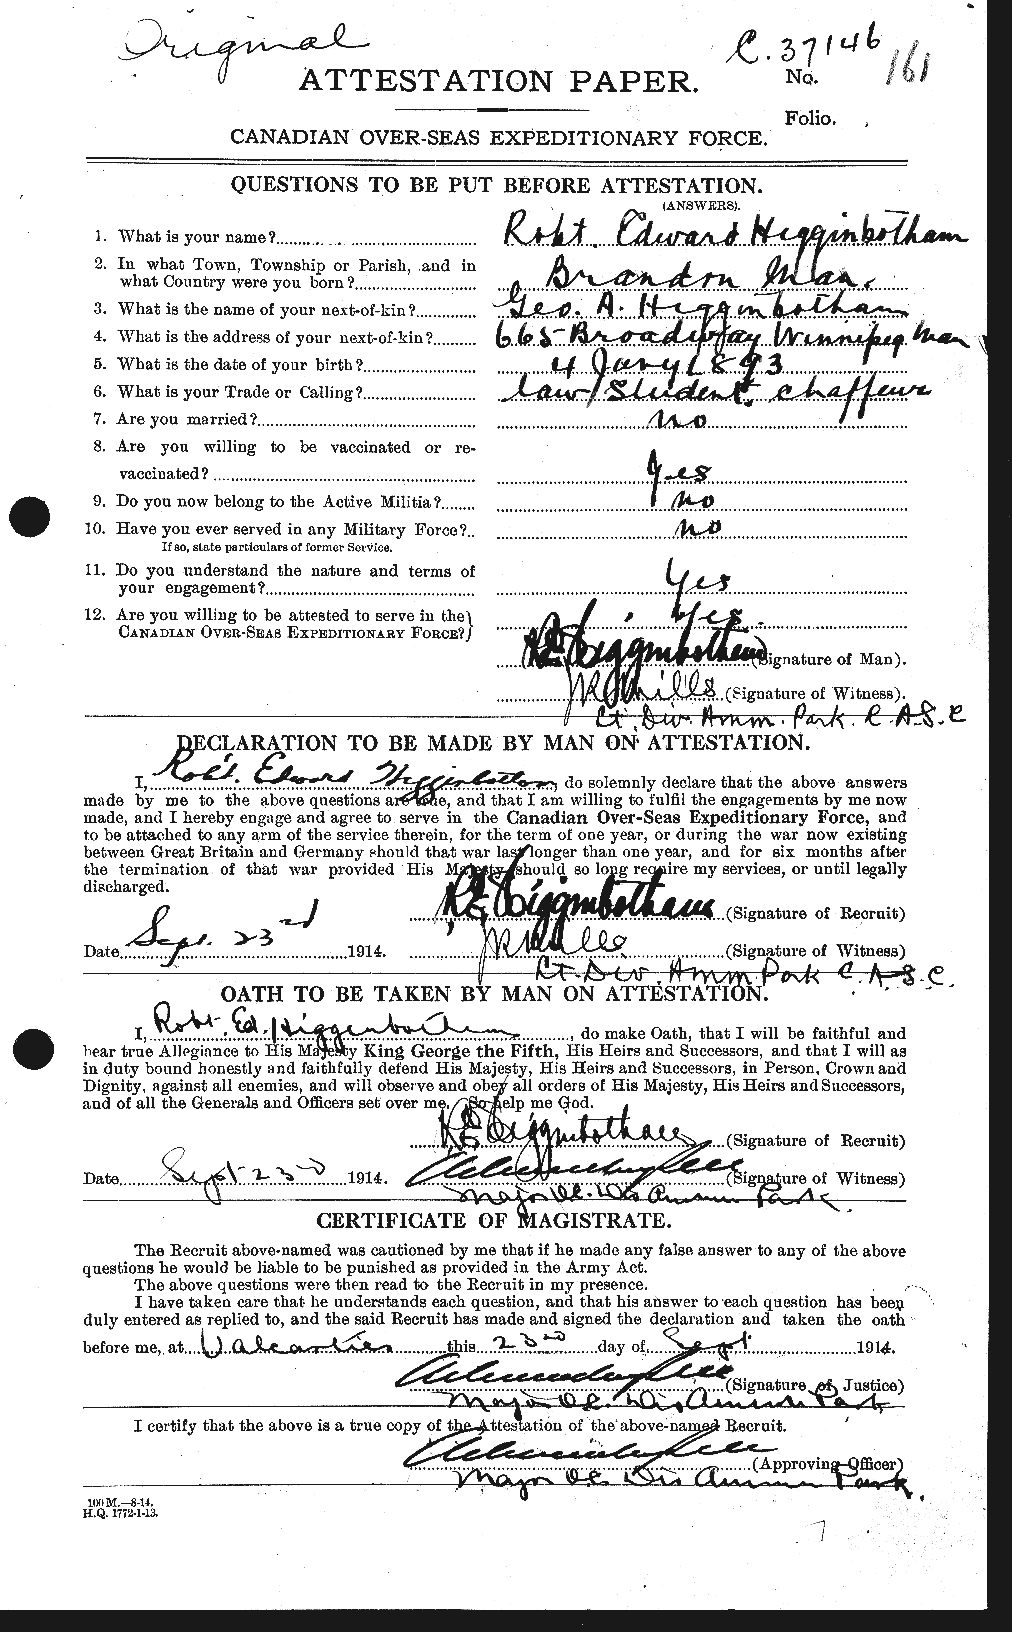 Personnel Records of the First World War - CEF 391797a